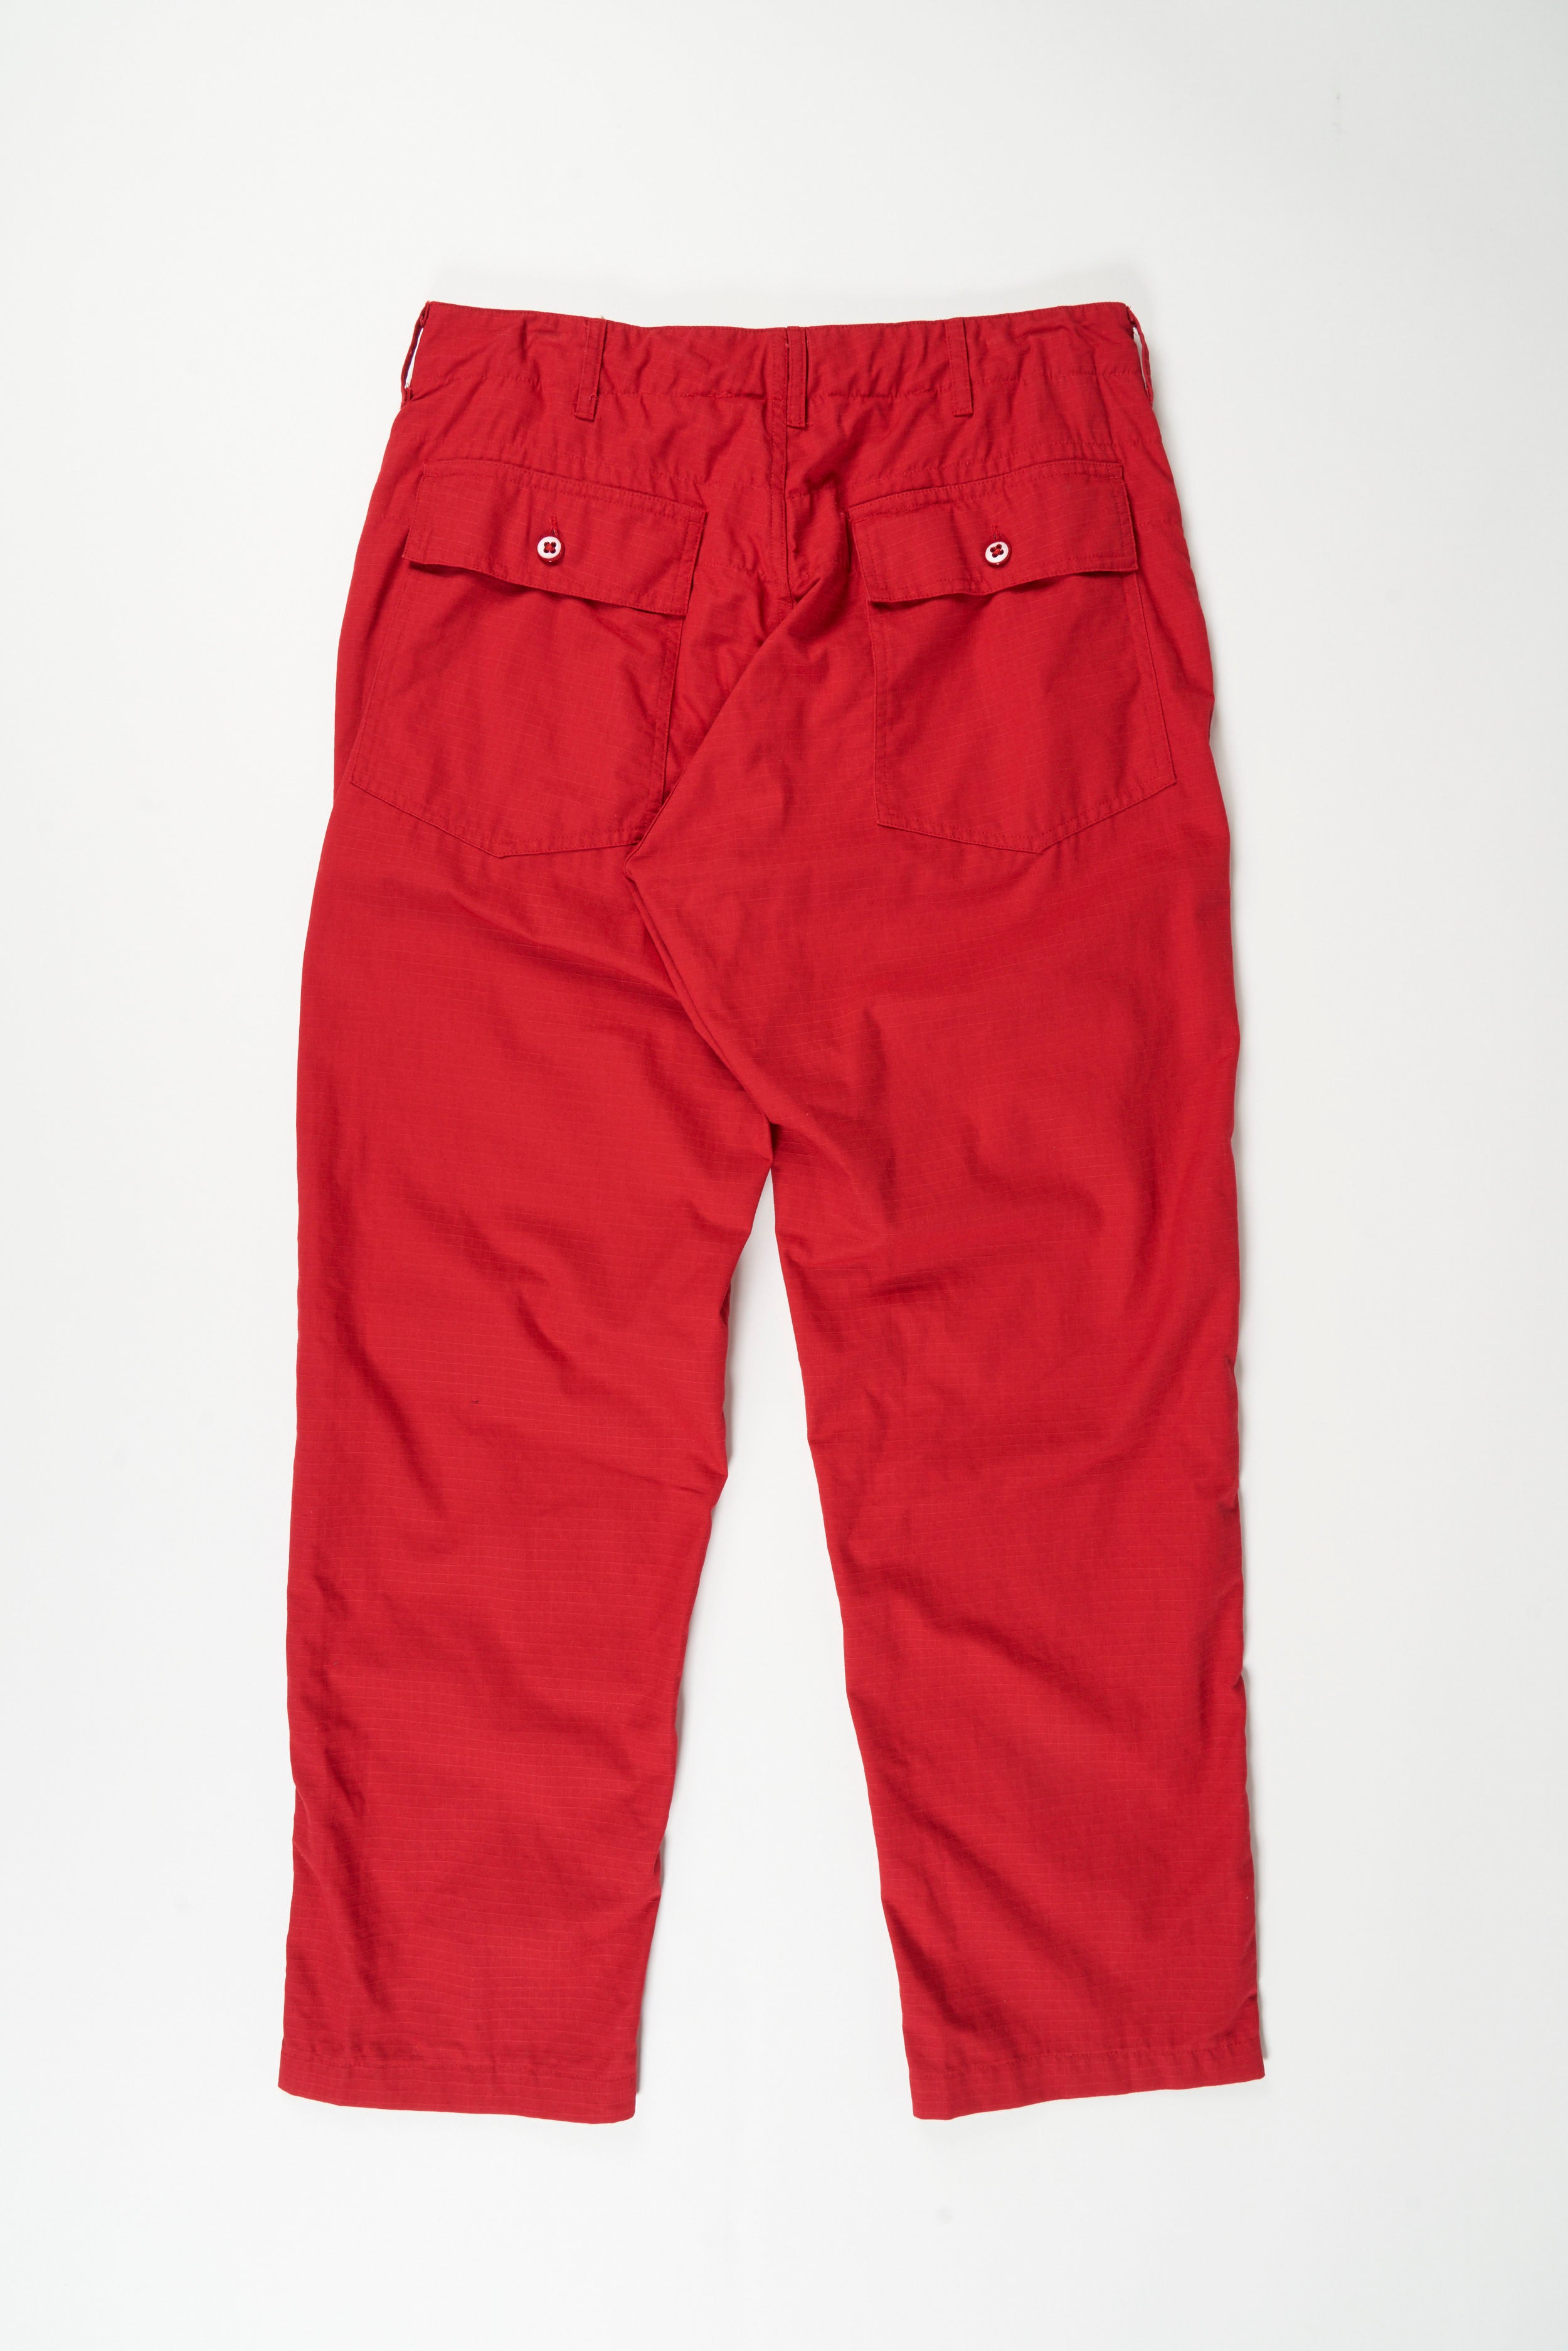 Fatigue Pant - Red Cotton Ripstop